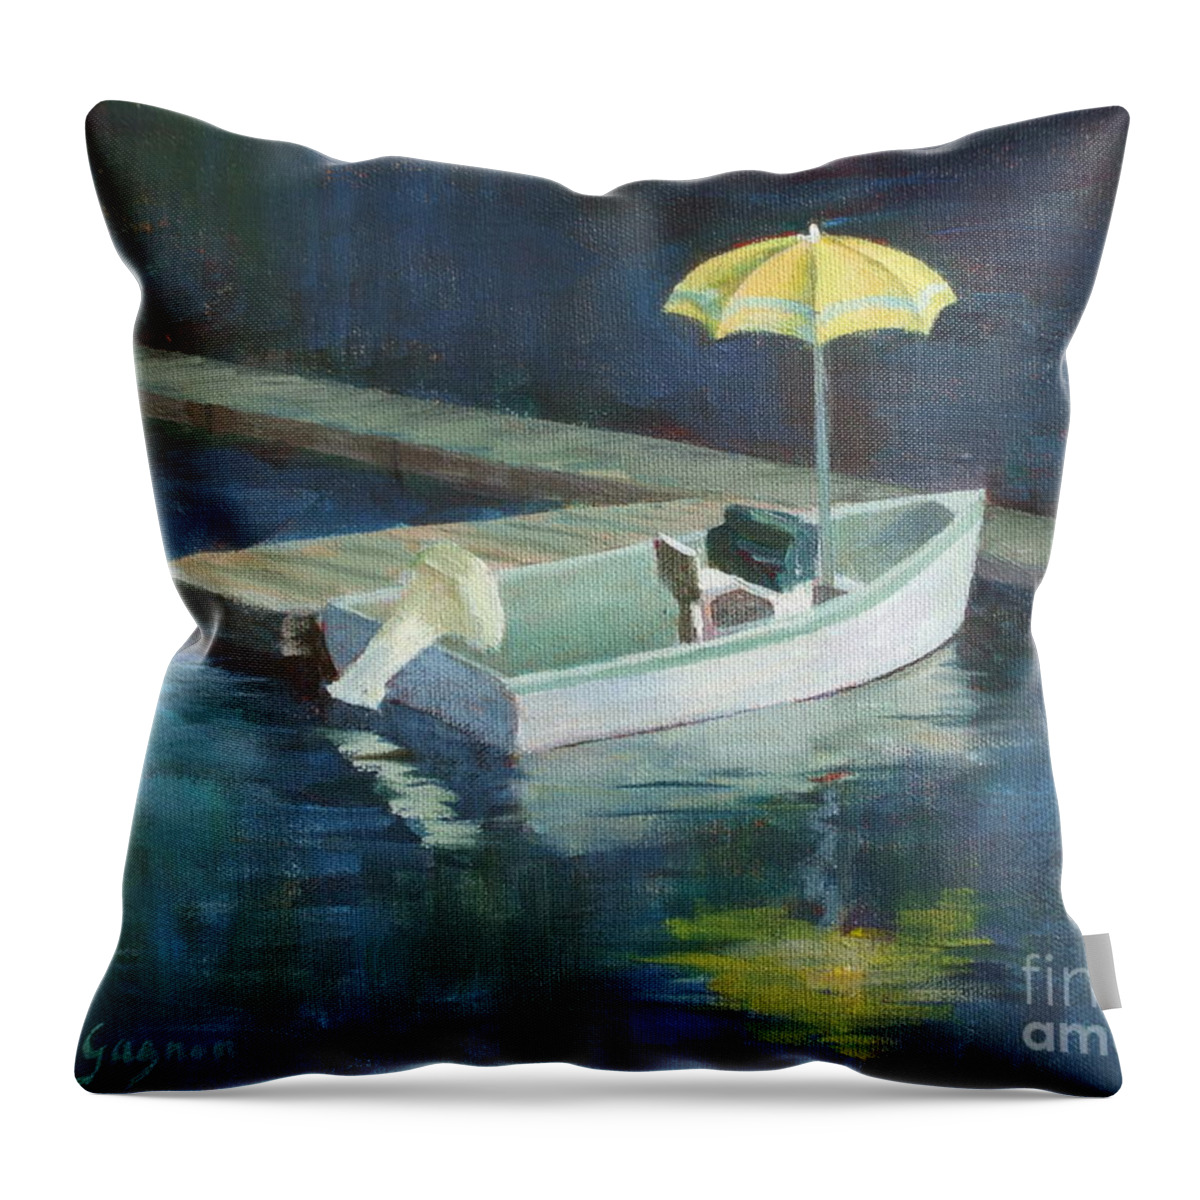 Outdoors Throw Pillow featuring the painting Yellow Umbrella by Claire Gagnon